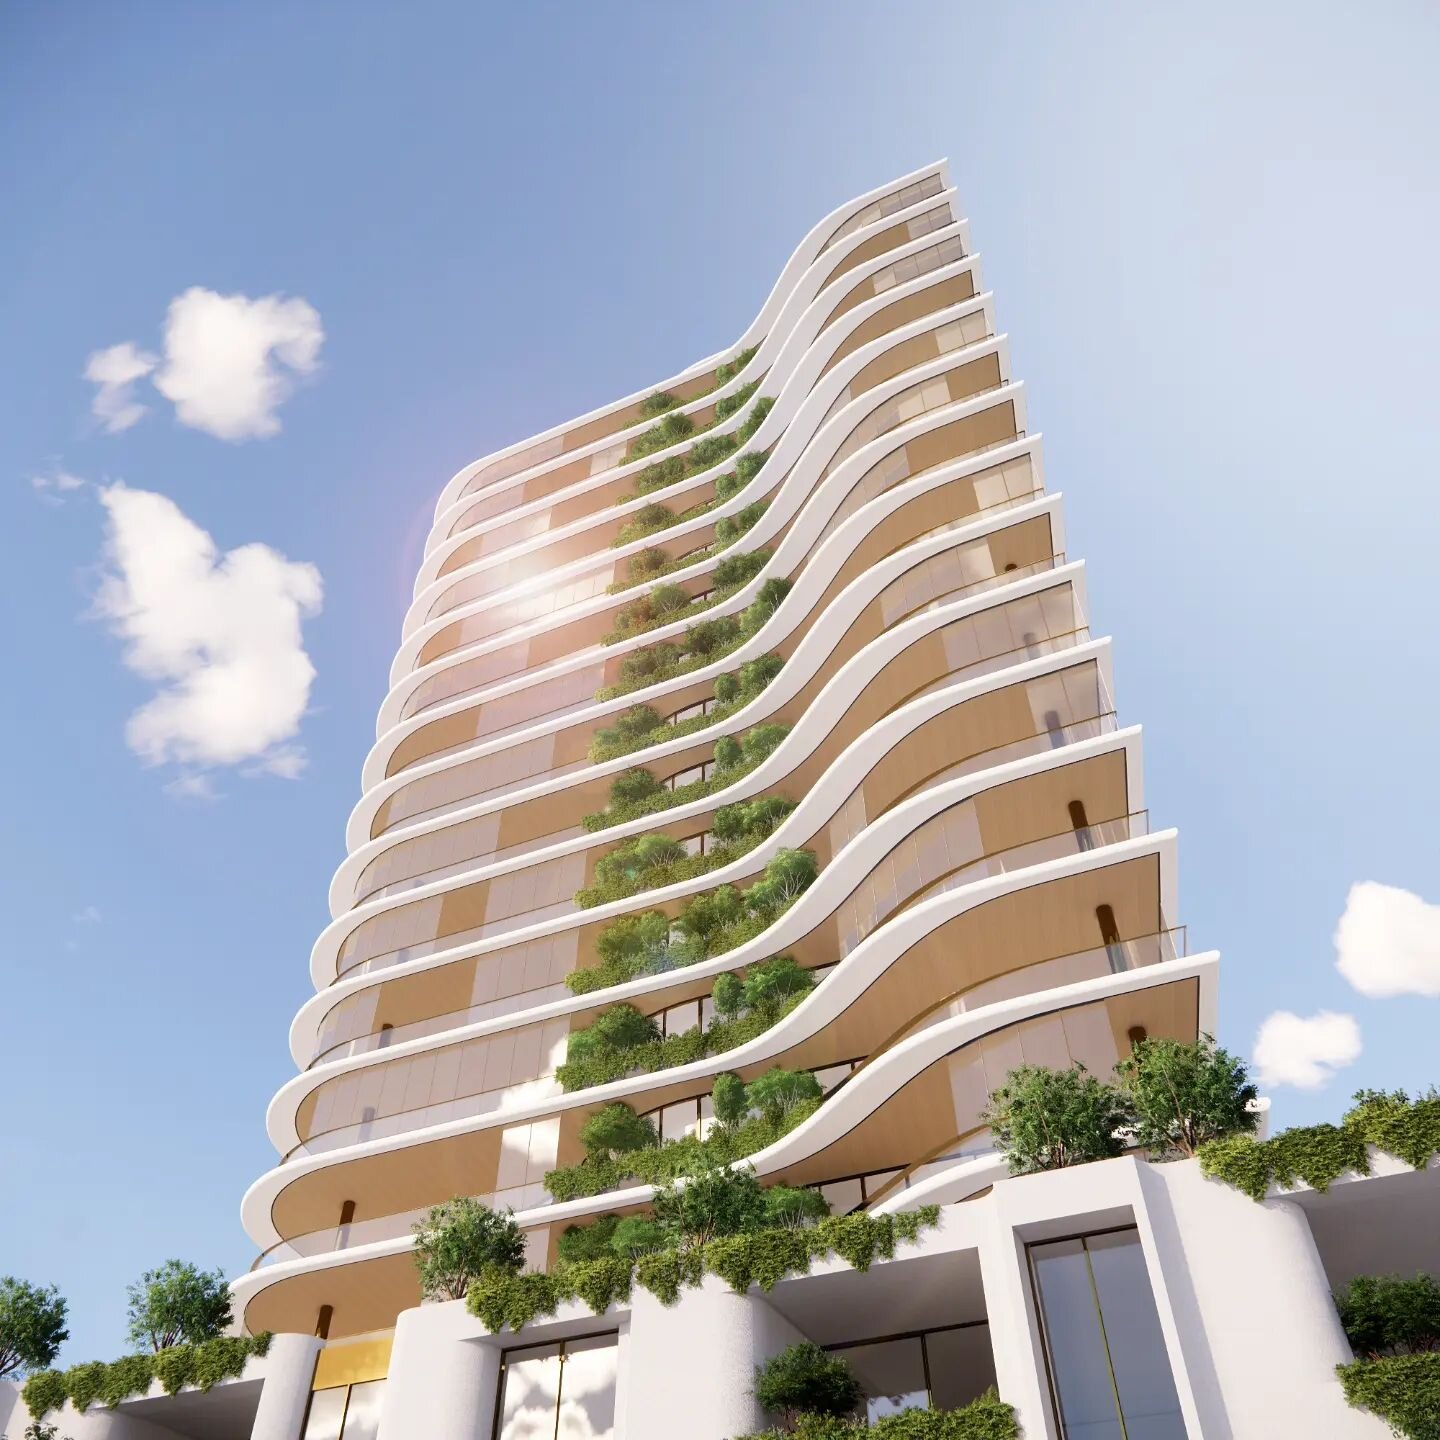 Sculptural flowing lines and lush vertical gardens frame luxury penthouse residences on this yet to be disclosed project by RAD architecture. More info soon!

#penthouse #sculptural #verticalgarden #perthapartments #perthdesign #pertharchitecture #au